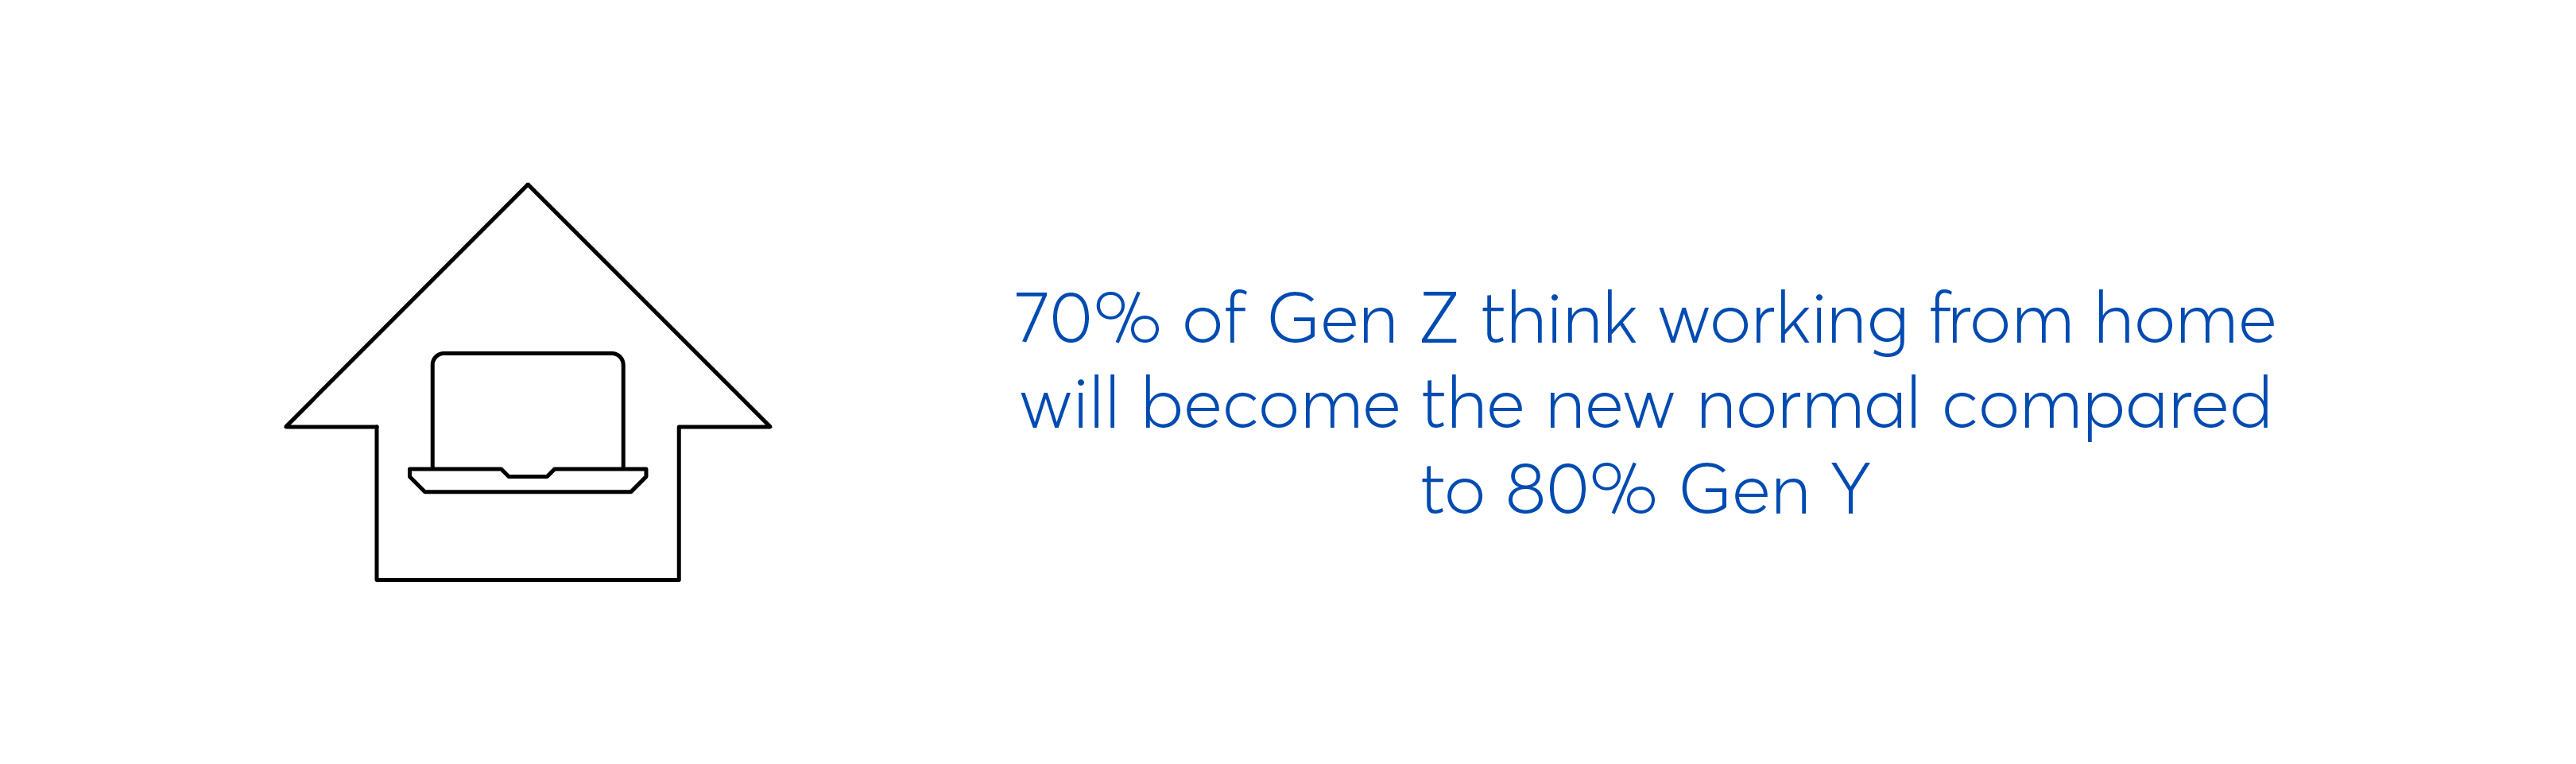 Gen Z believe working from home will become the new normal